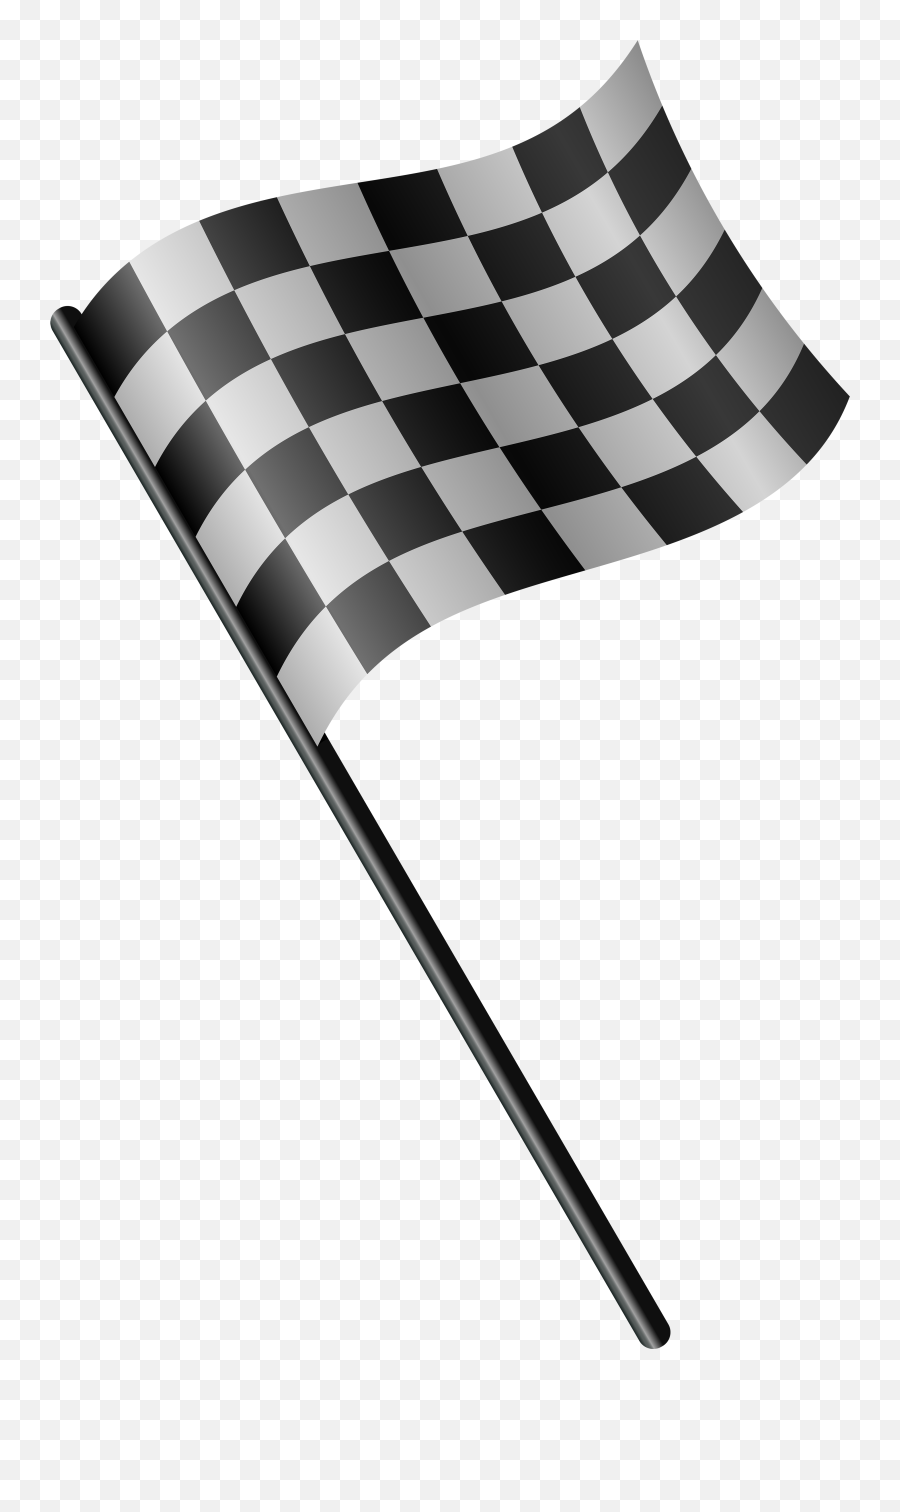 Checkered Flags Png 450663 - Single Checkered Flag Transparent Background Emoji,Race Flag Clipart